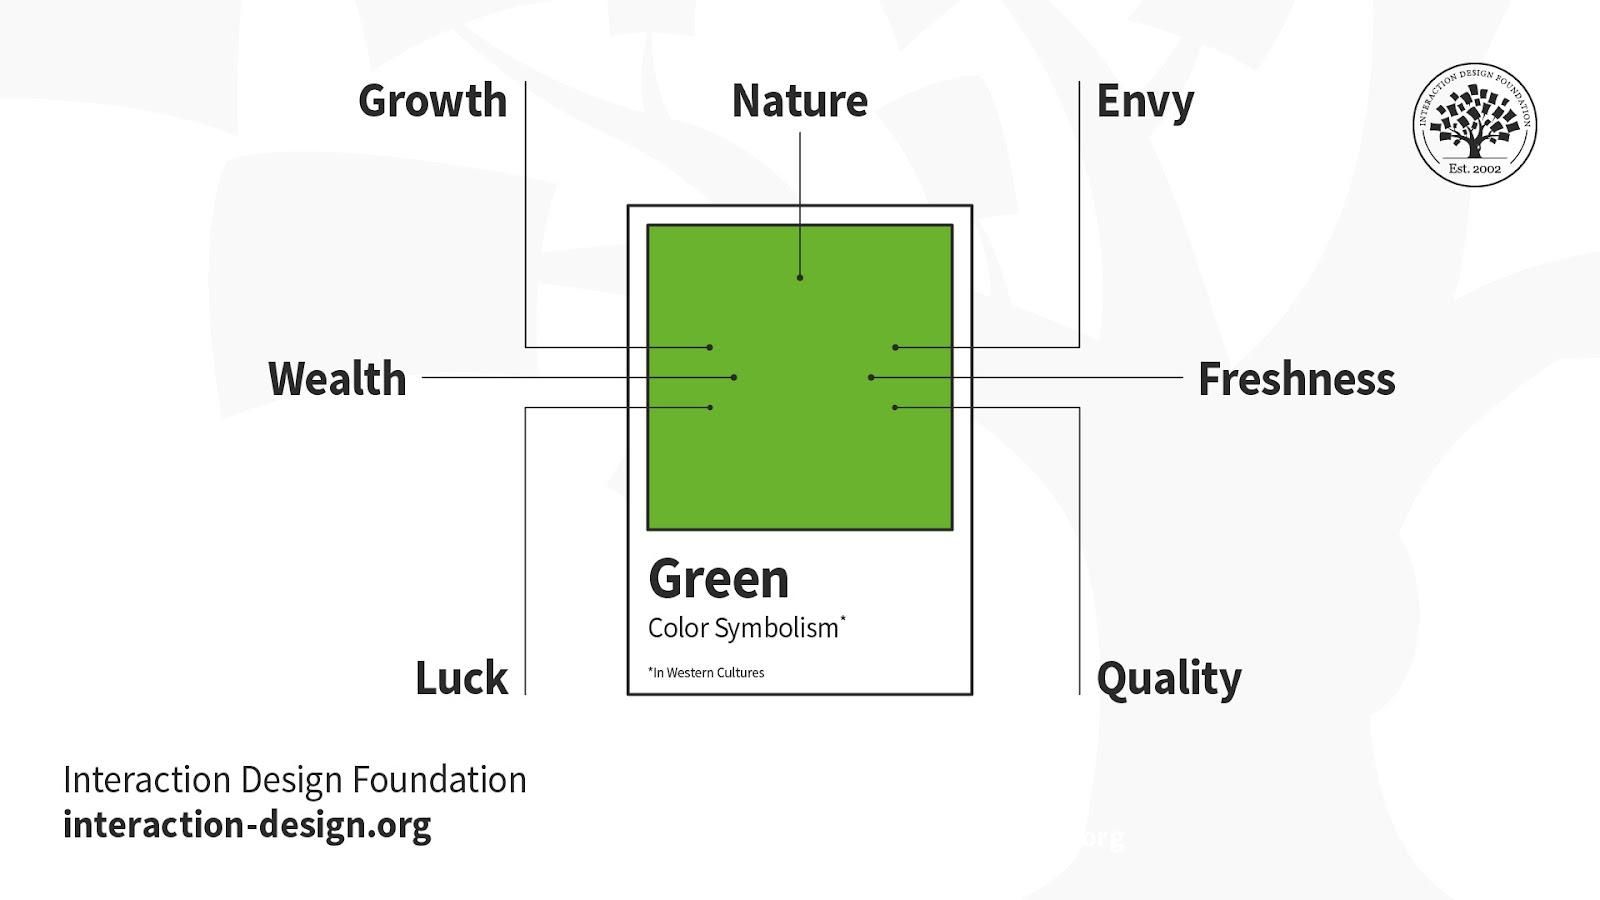 Illustration depicting key words symbolized by the color green